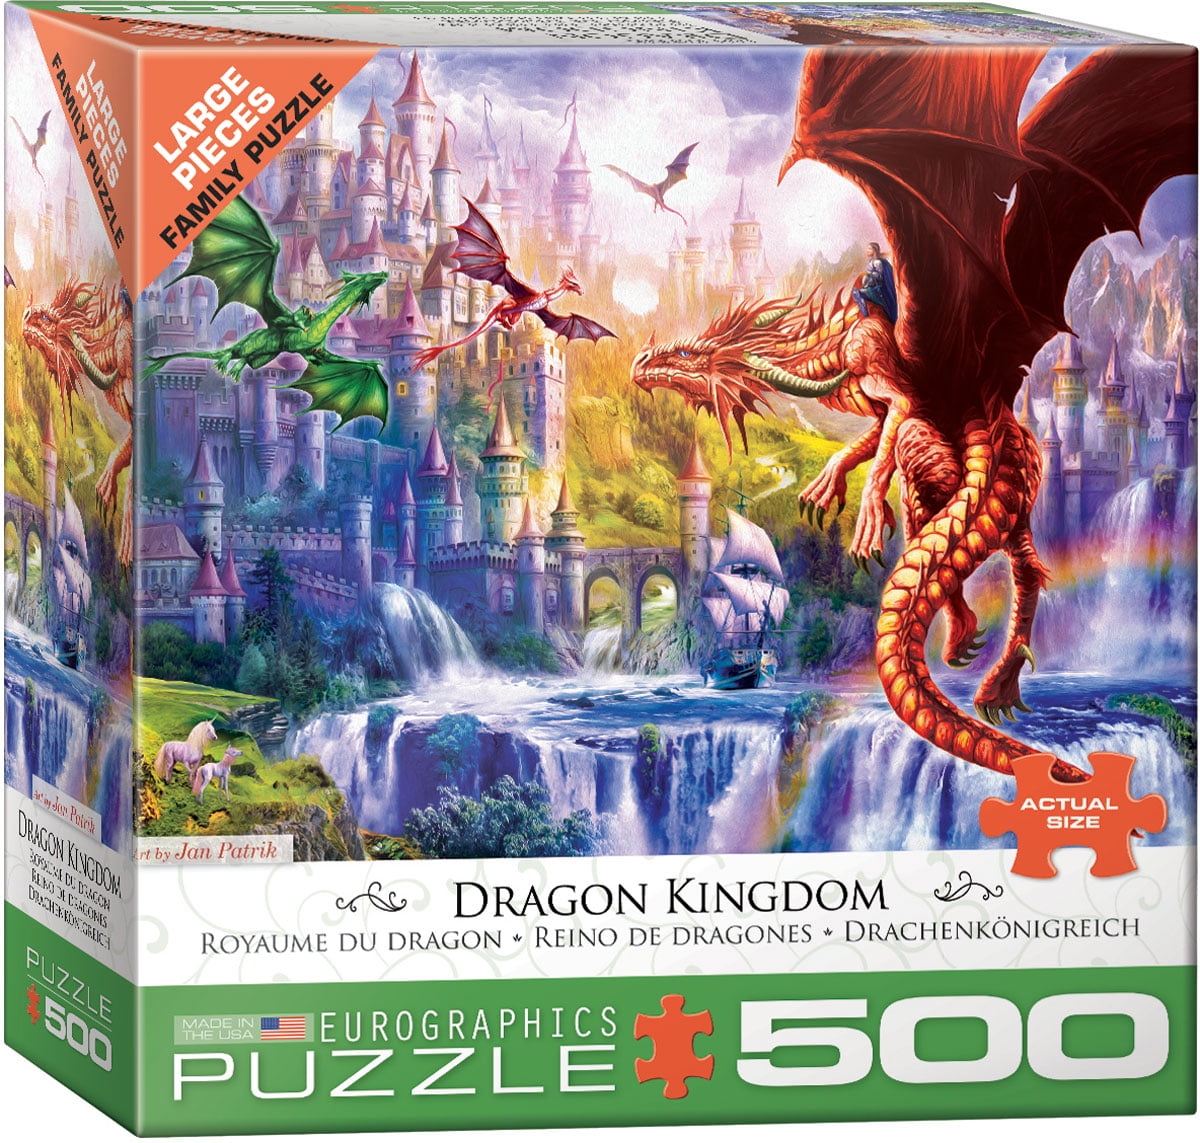 NEW Cobble Hill Jigsaw Puzzle Game 1000 Pieces Tiles "Dragonforge" 